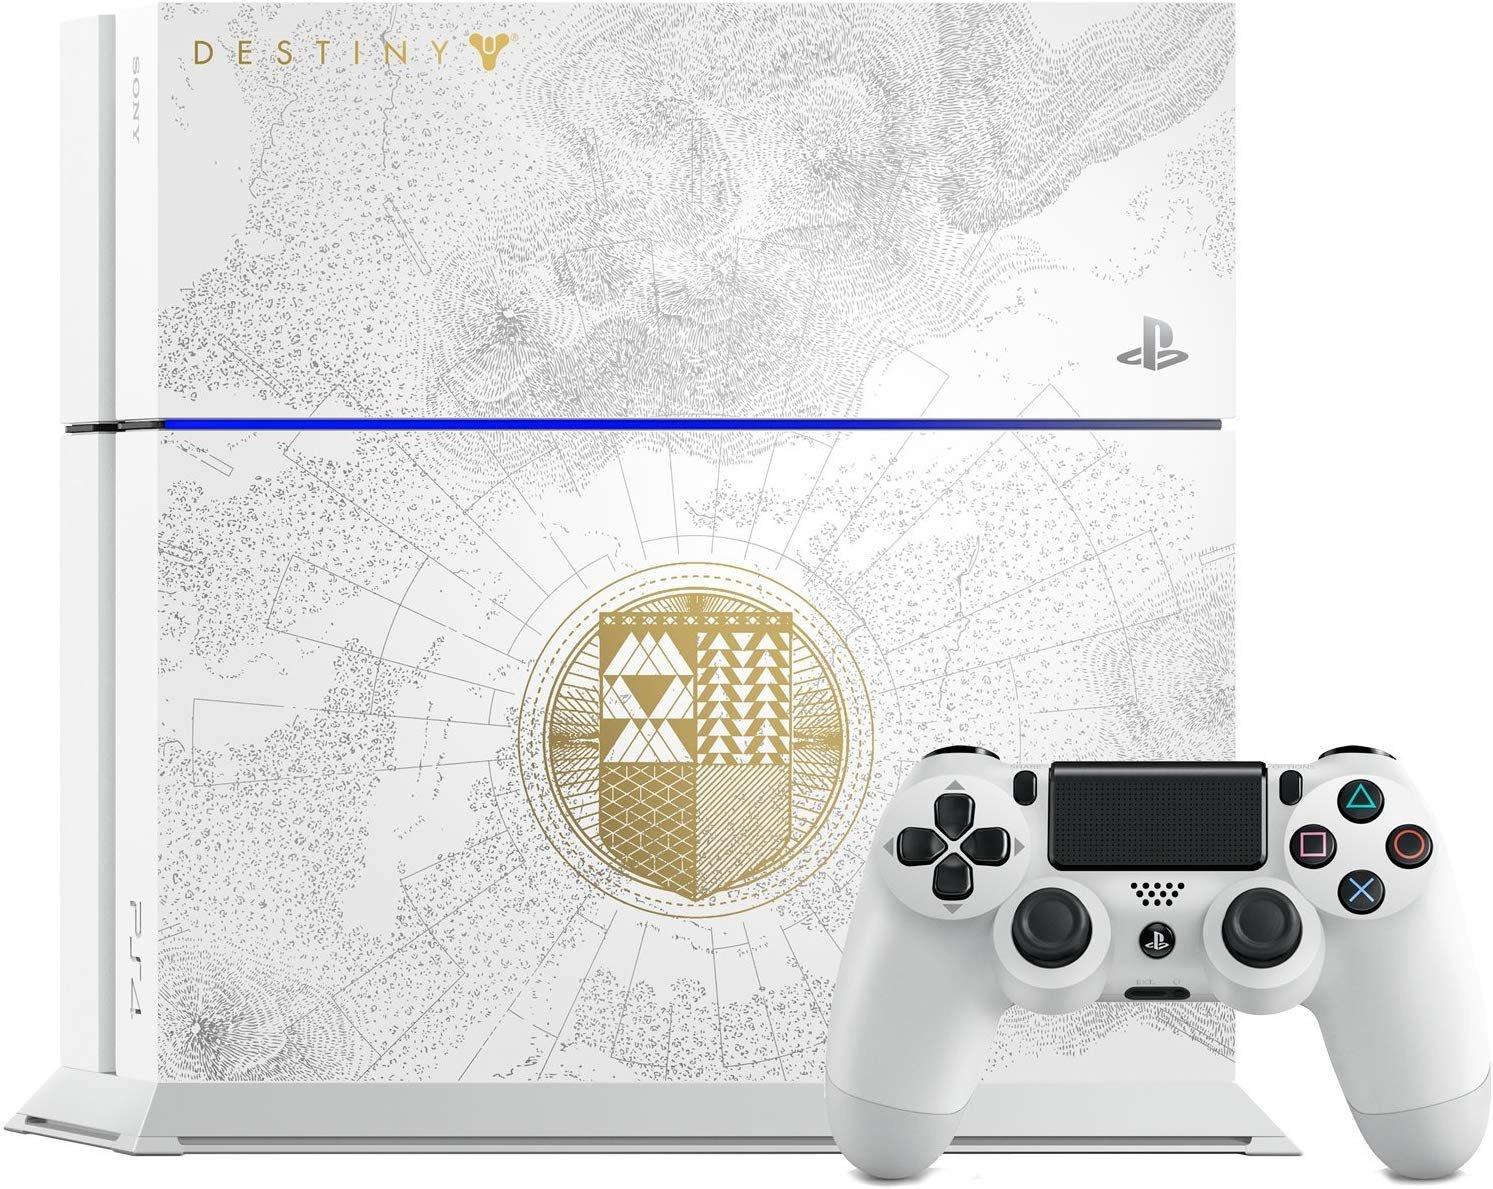 Sony PlayStation 4 Console Destiny: The Taken Limited Edition | GameStop